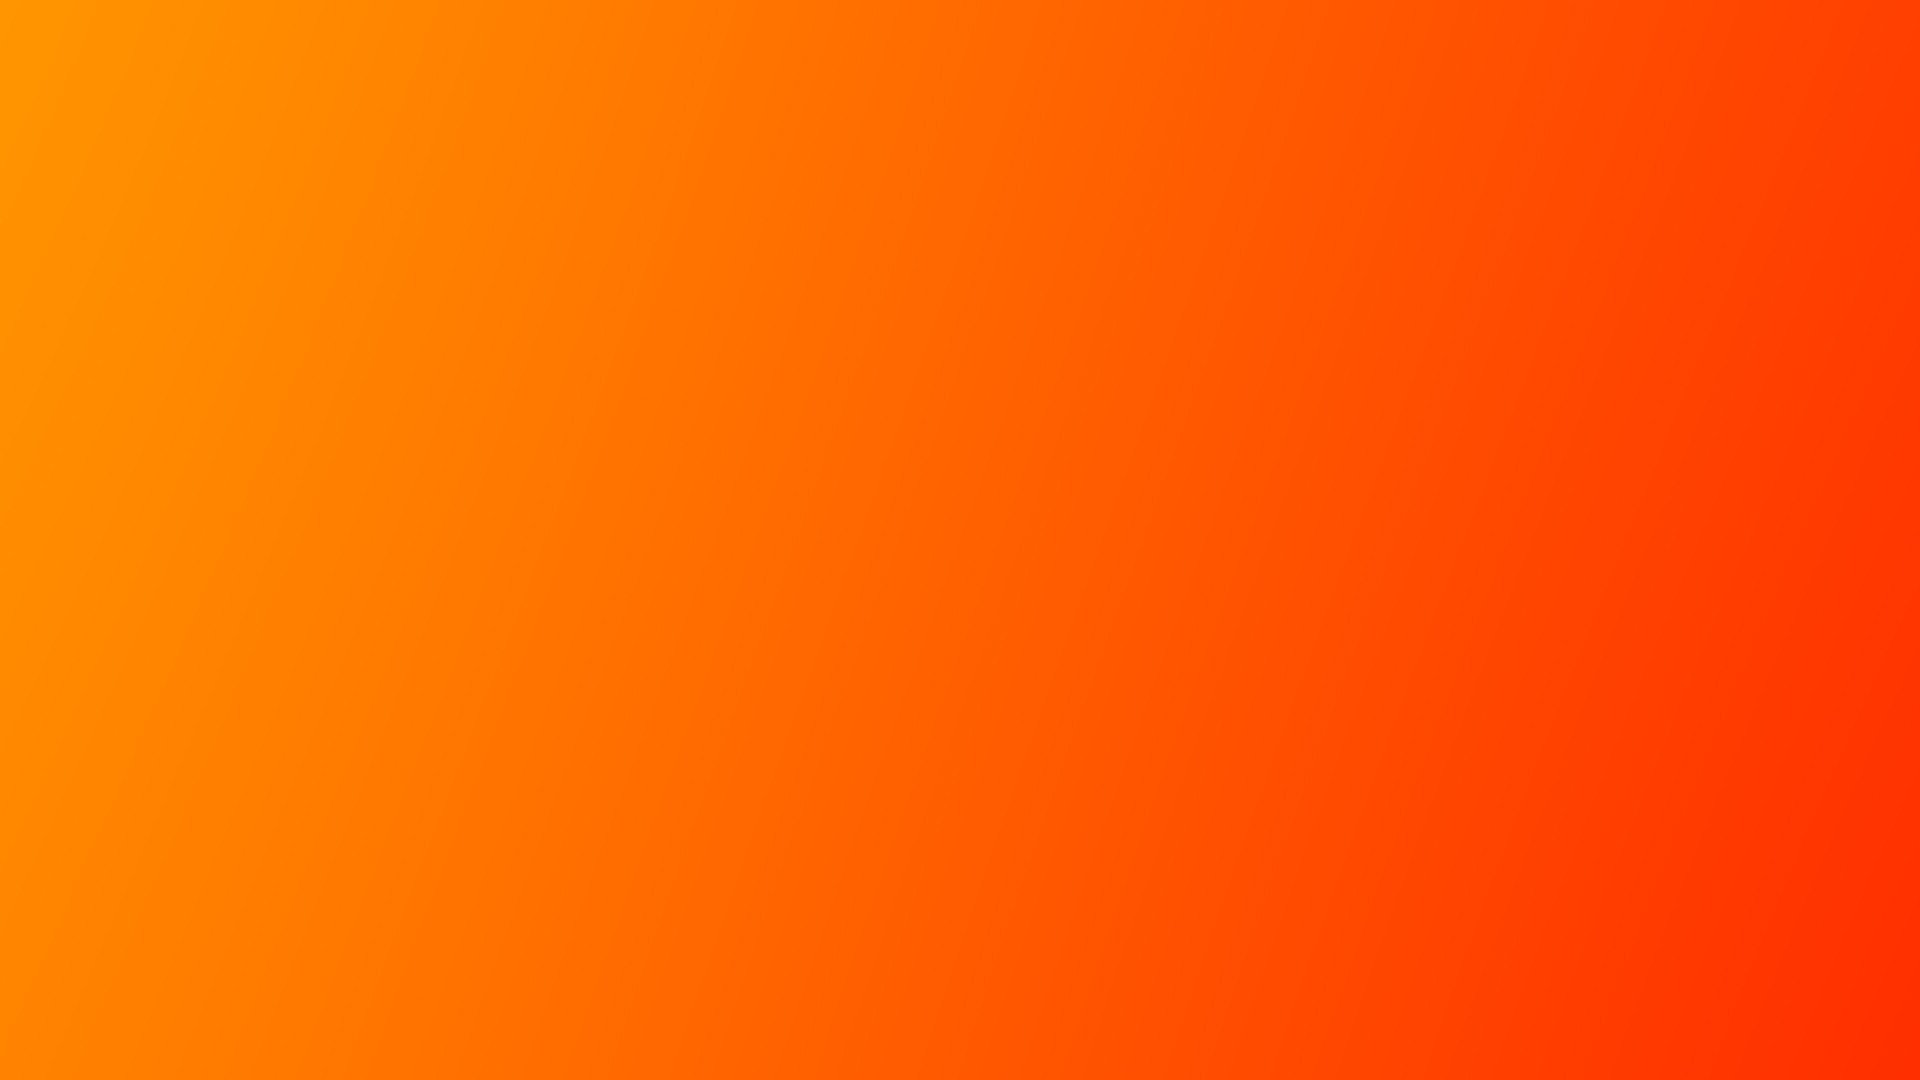 Orange Gradient Hd Wallpapers Desktop And Mobile Images And Photos